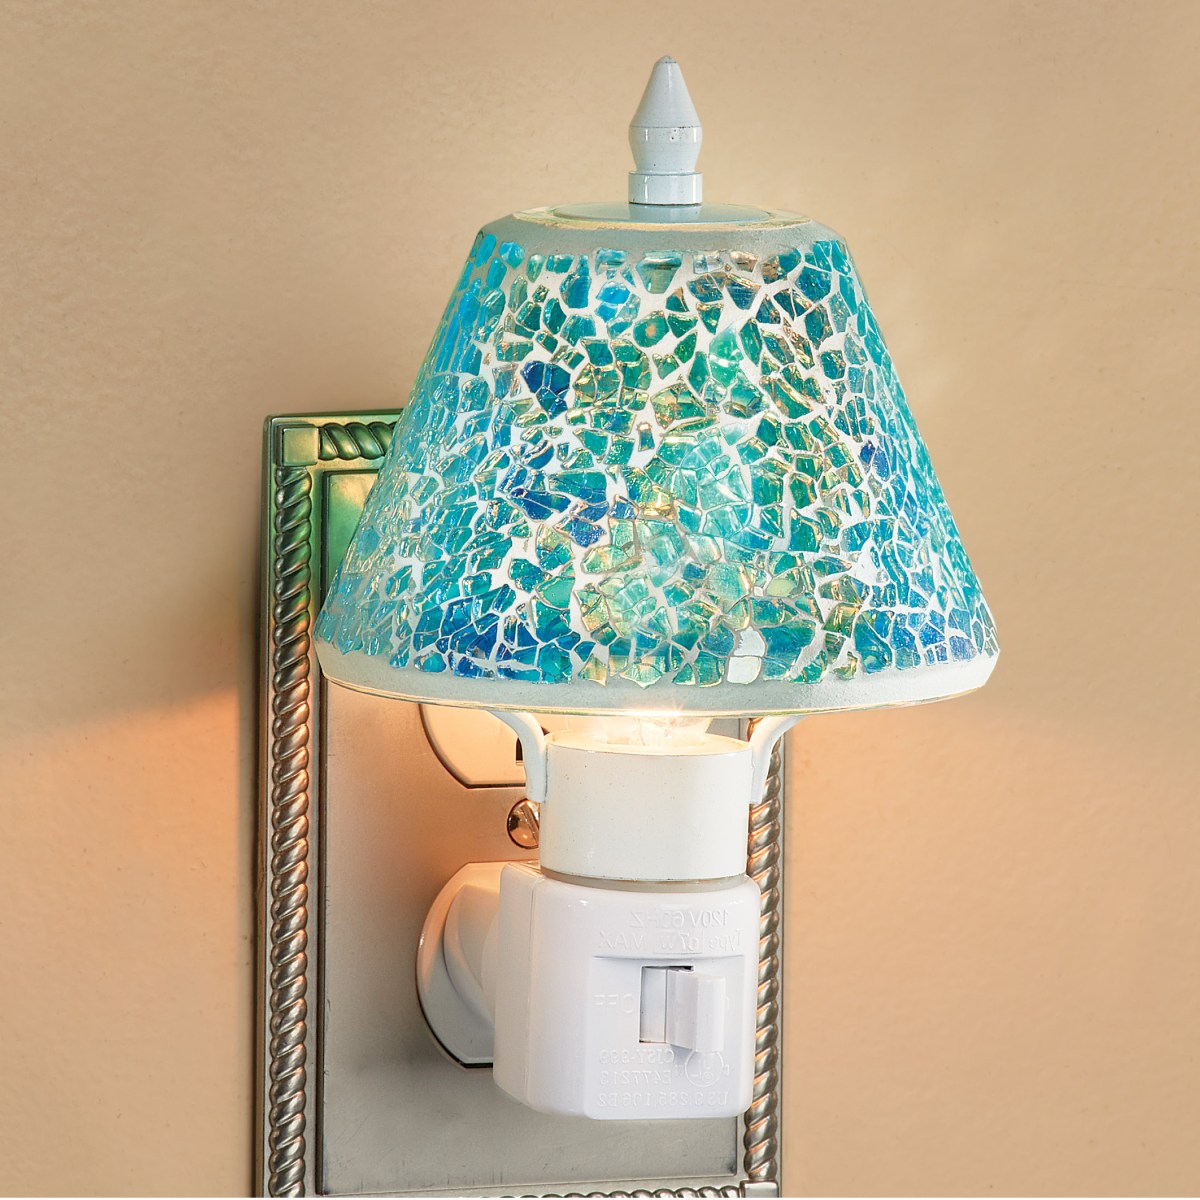 Glass Mosaic Plug In Nightlight Collections Etc.